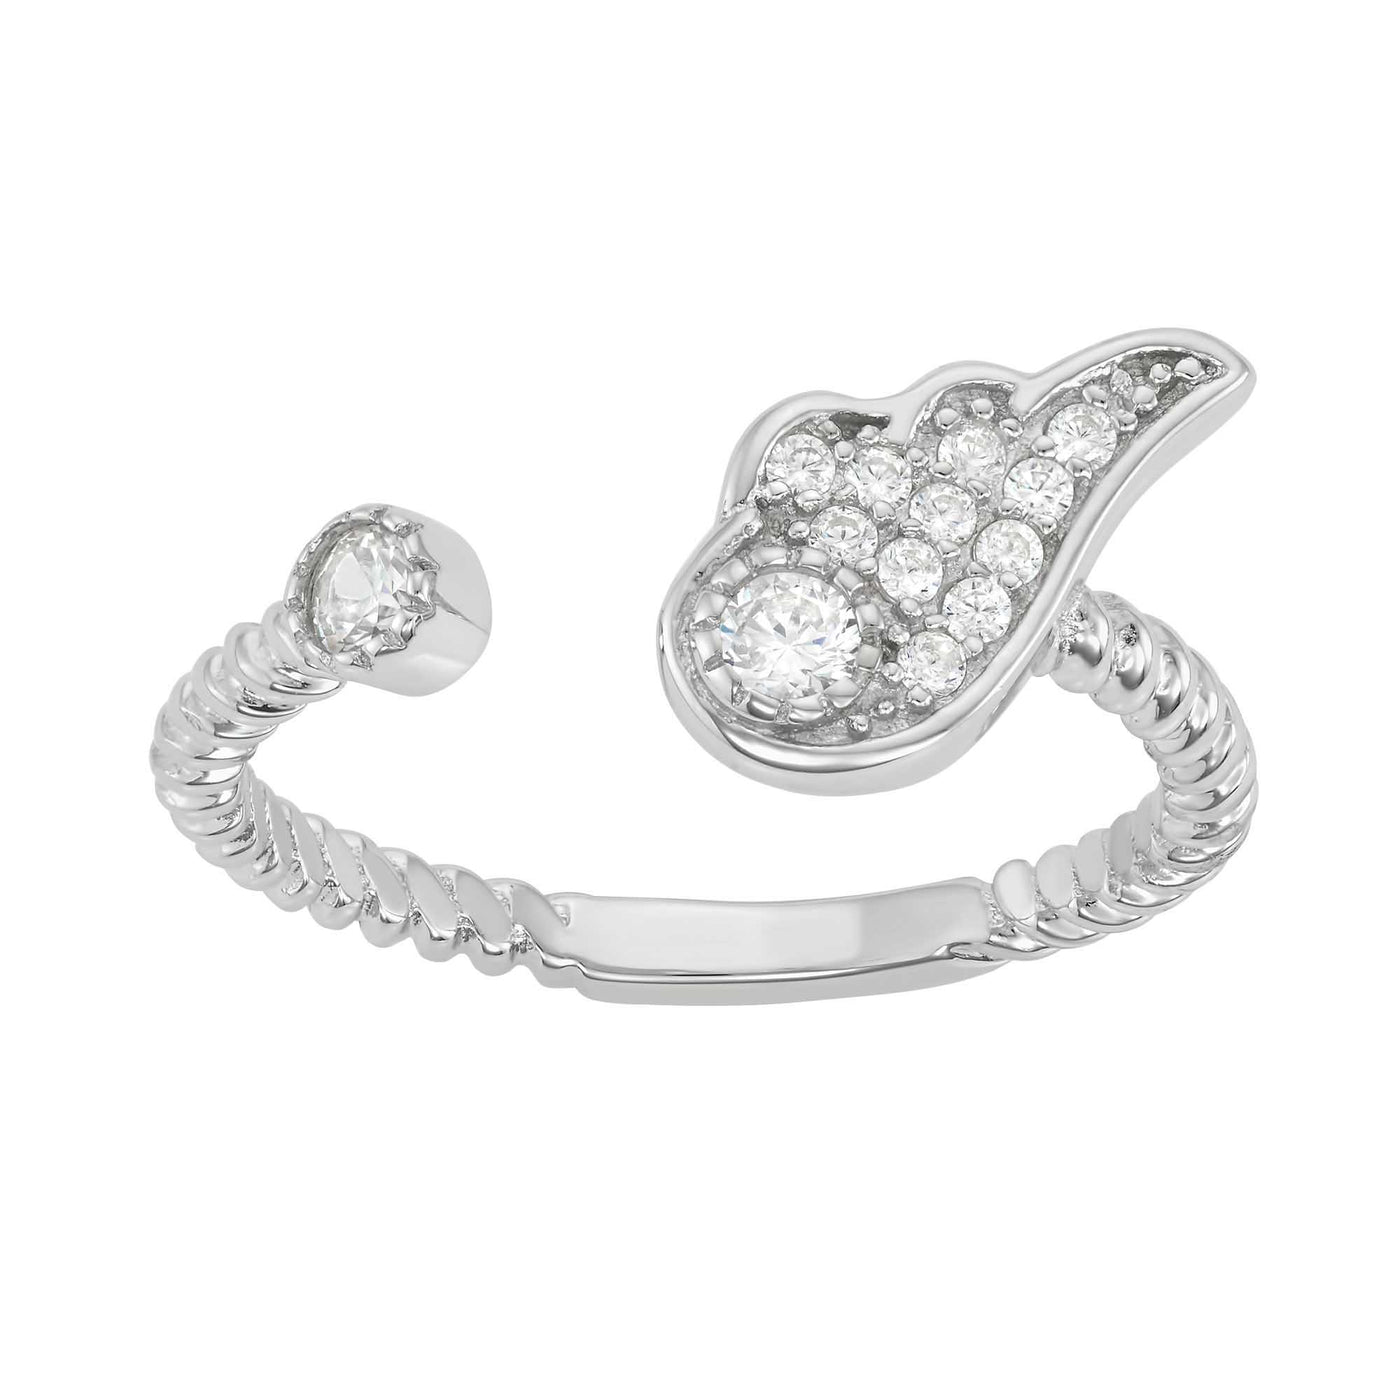 Rebecca Sloane Silver Angel Wing and Circle Ring With CZ Stones